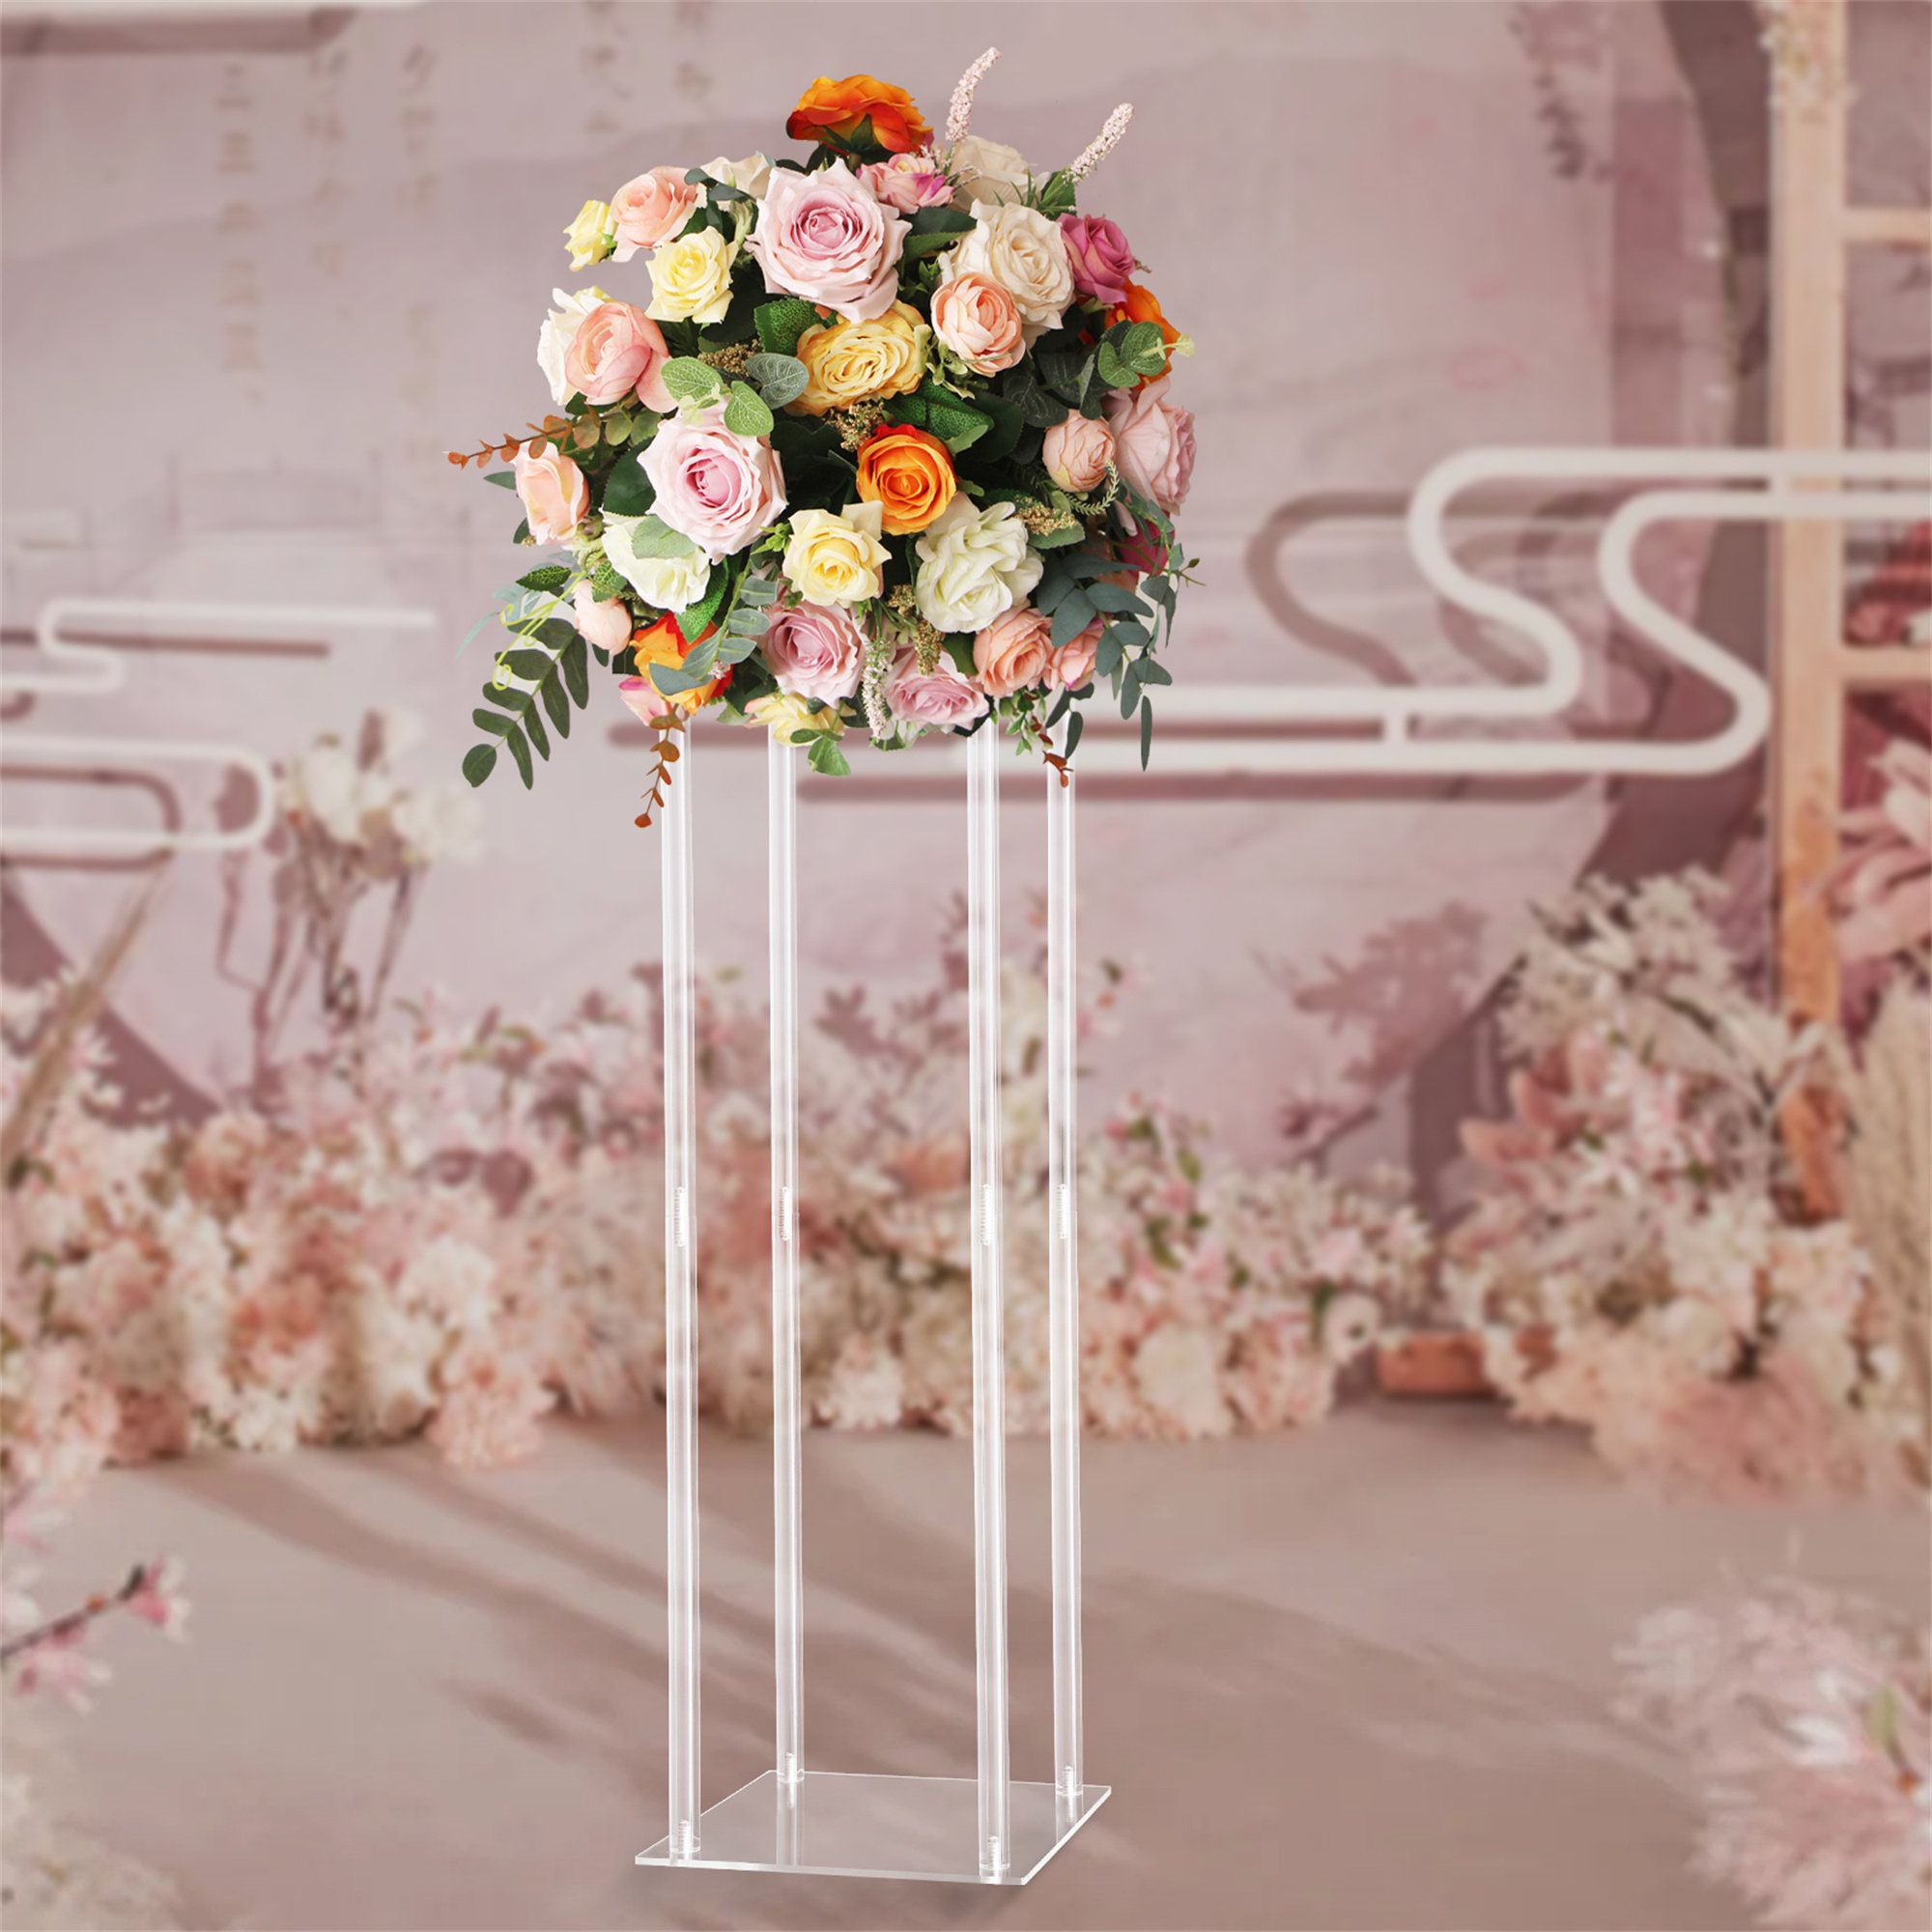 Funten 31 Inch Clear Acrylic Flower Stand Rectangular Post Center  Decoration | Wayfair With 31 Inch Plant Stands (Photo 15 of 15)